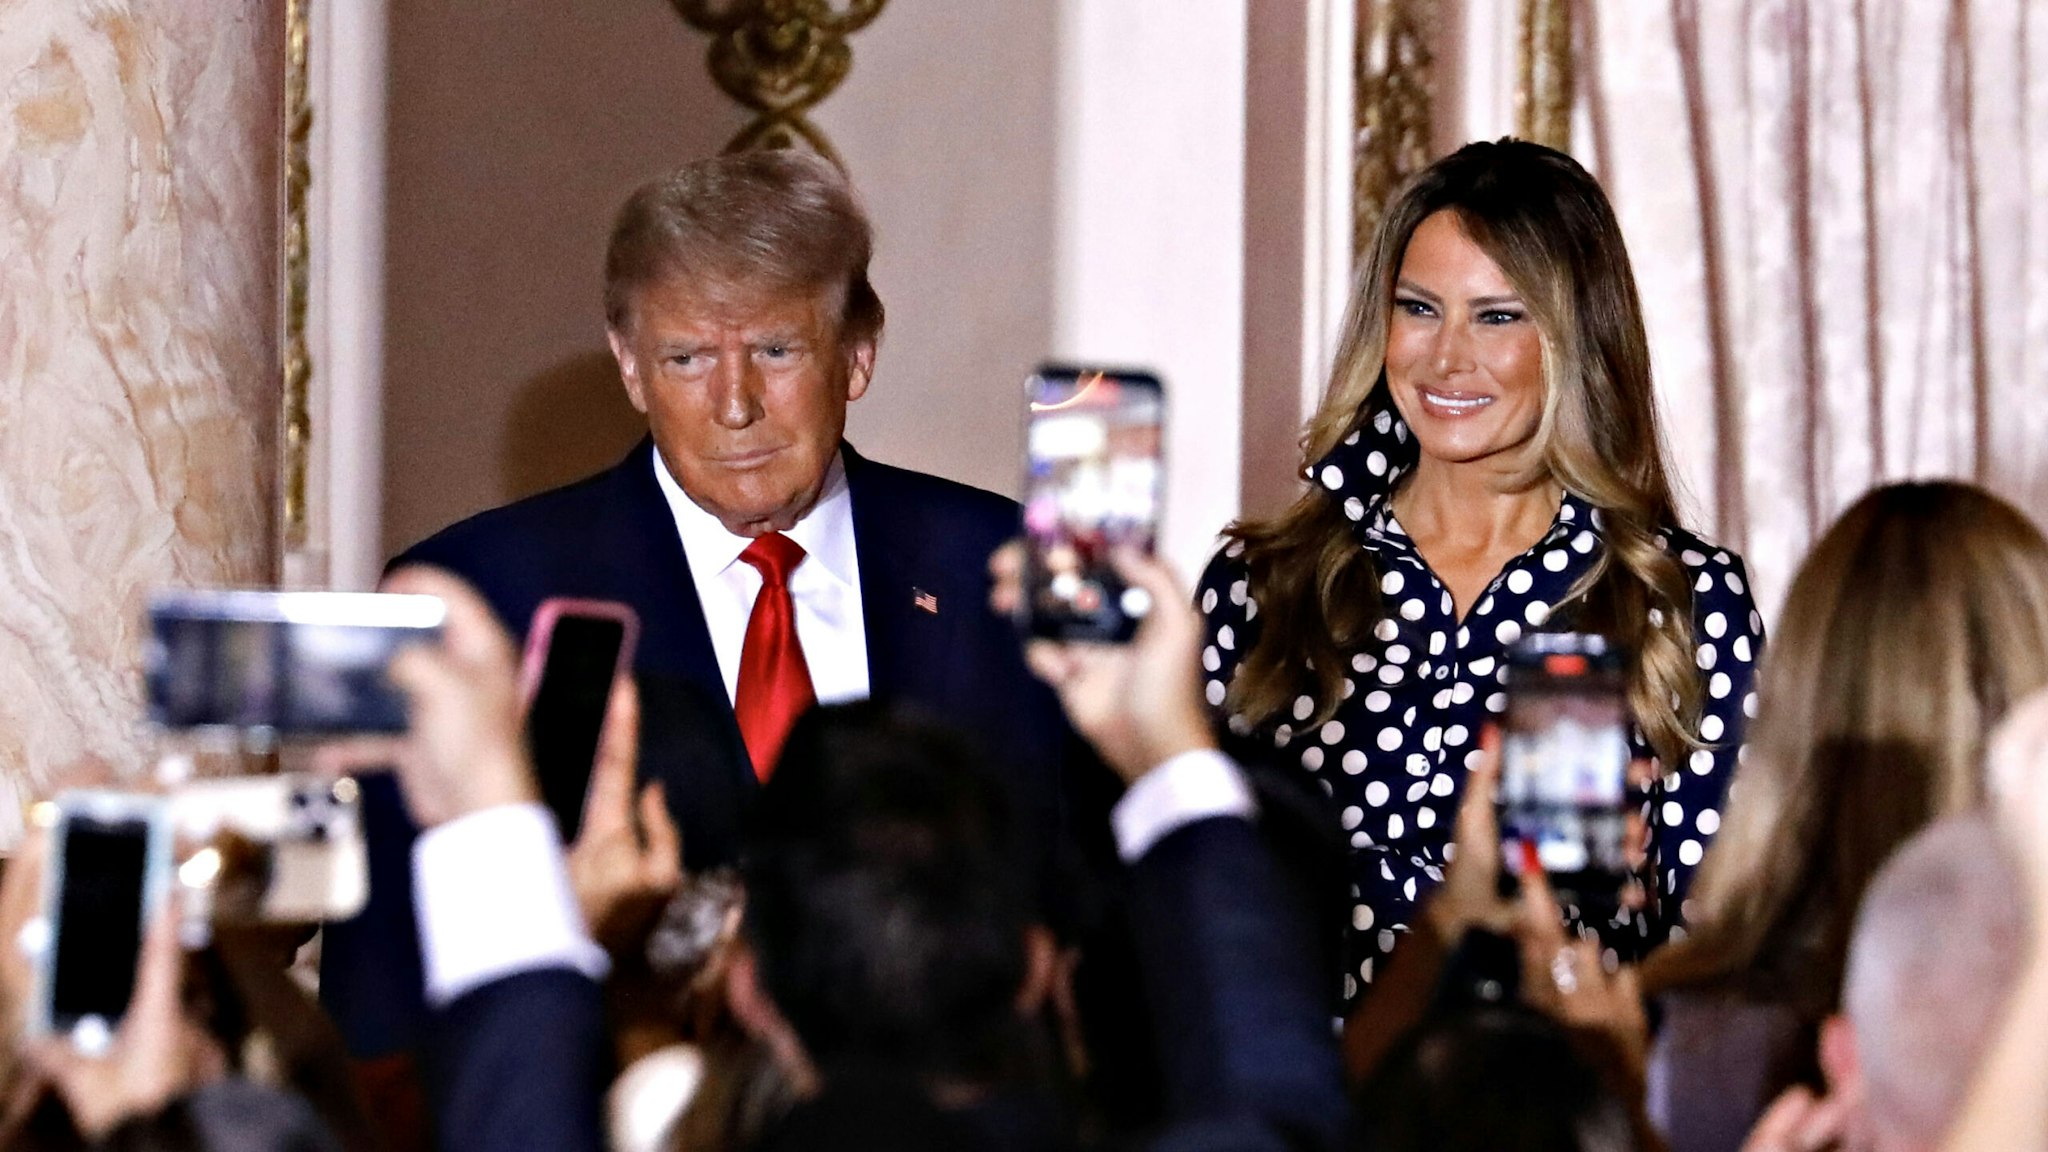 Former US President Donald Trump, center, arrives to speak with former First Lady Melania Trump, center right, at the Mar-a-Lago Club in Palm Beach, Florida, US, on Tuesday, Nov. 15, 2022. Trump formally entered the 2024 US presidential race, making official what he's been teasing for months just as many Republicans are preparing to move away from their longtime standard bearer.